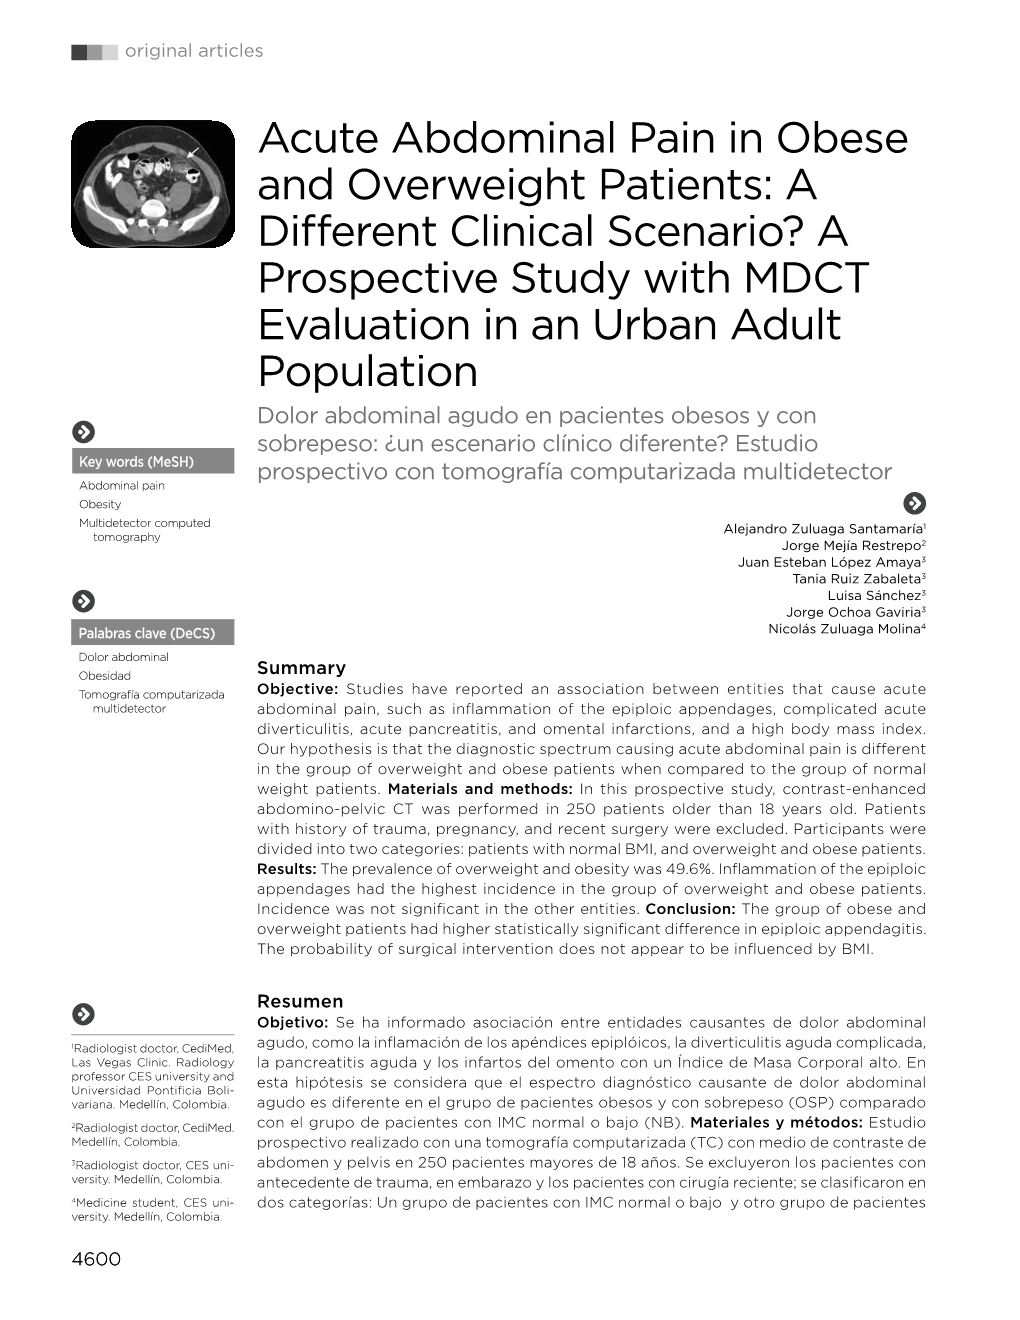 Acute Abdominal Pain in Obese and Overweight Patients: a Different